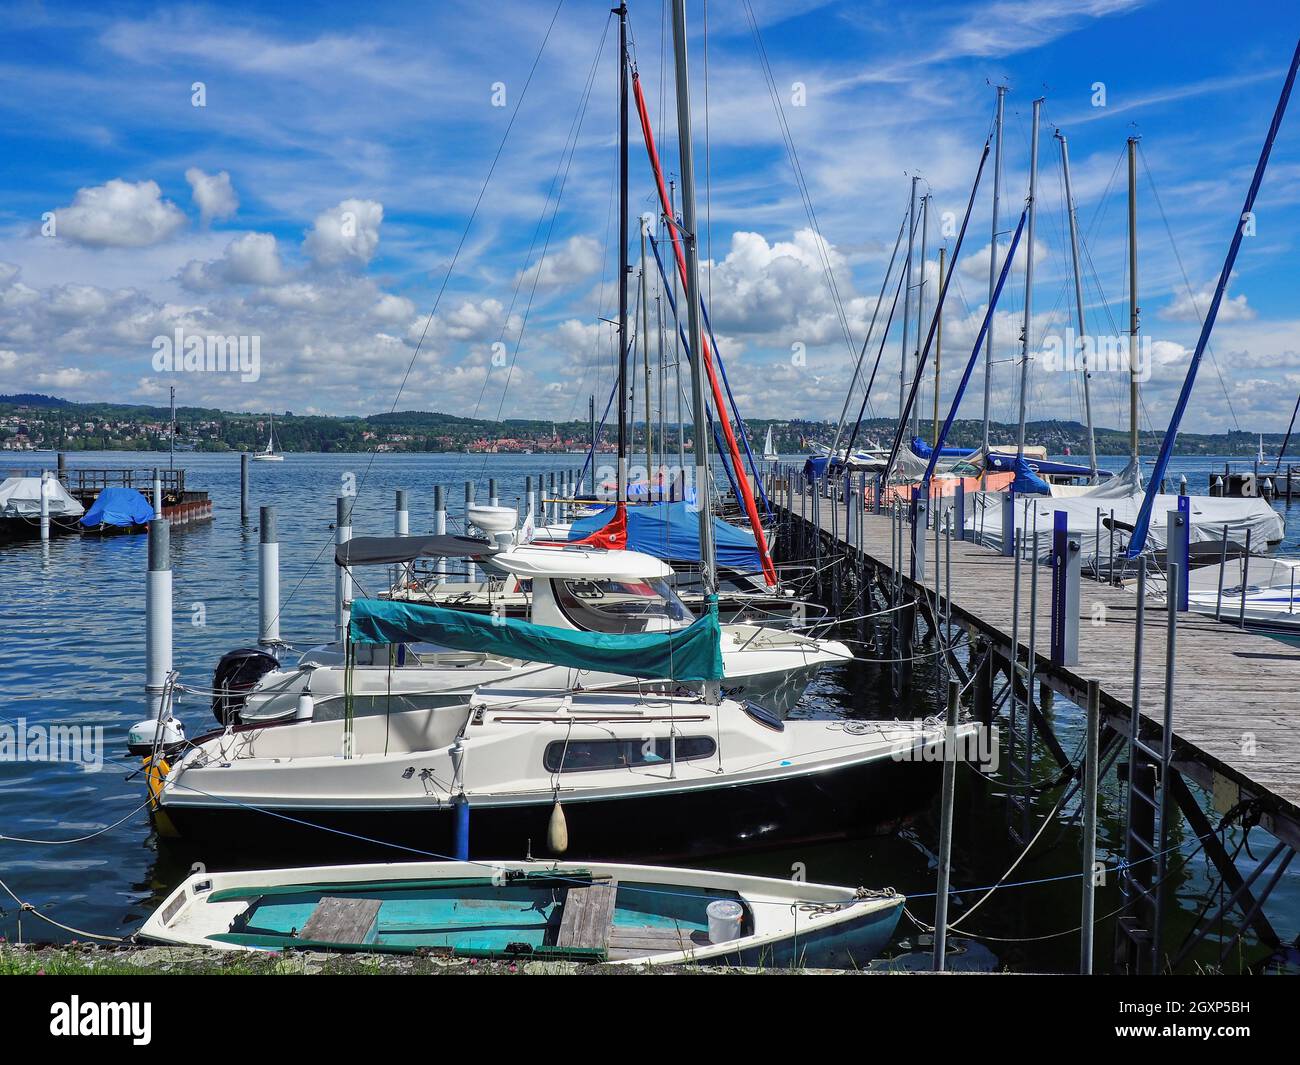 A wooden boat jetty on Lake Constance, Germany, with moored, small sailing boats. Blue summer sky with white tufted clouds. Stock Photo